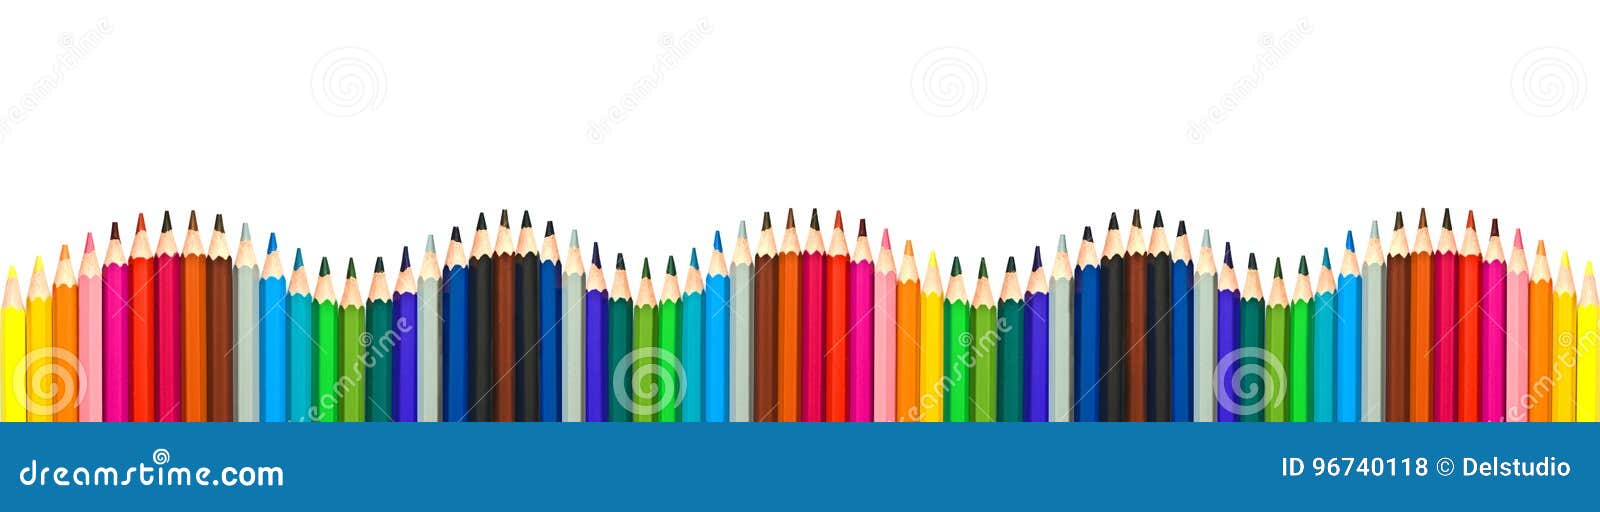 wave of colorful wooden pencils  on white, panoramic background, back to school concept